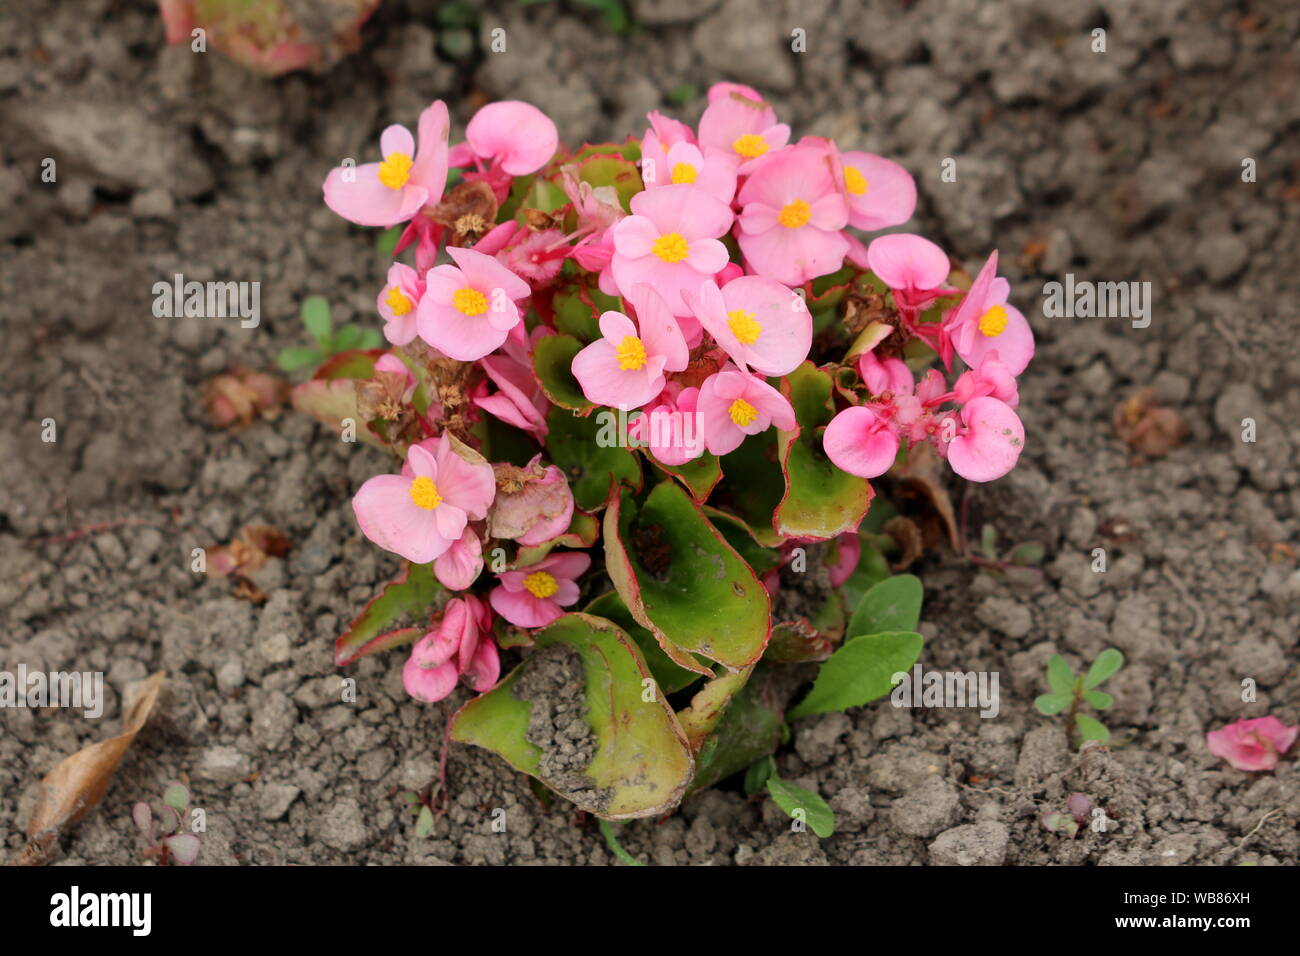 Begonia plants growing in shape of small bush with dark pink flowers and  yellow center surrounded with light green leaves and dry soil Stock Photo -  Alamy